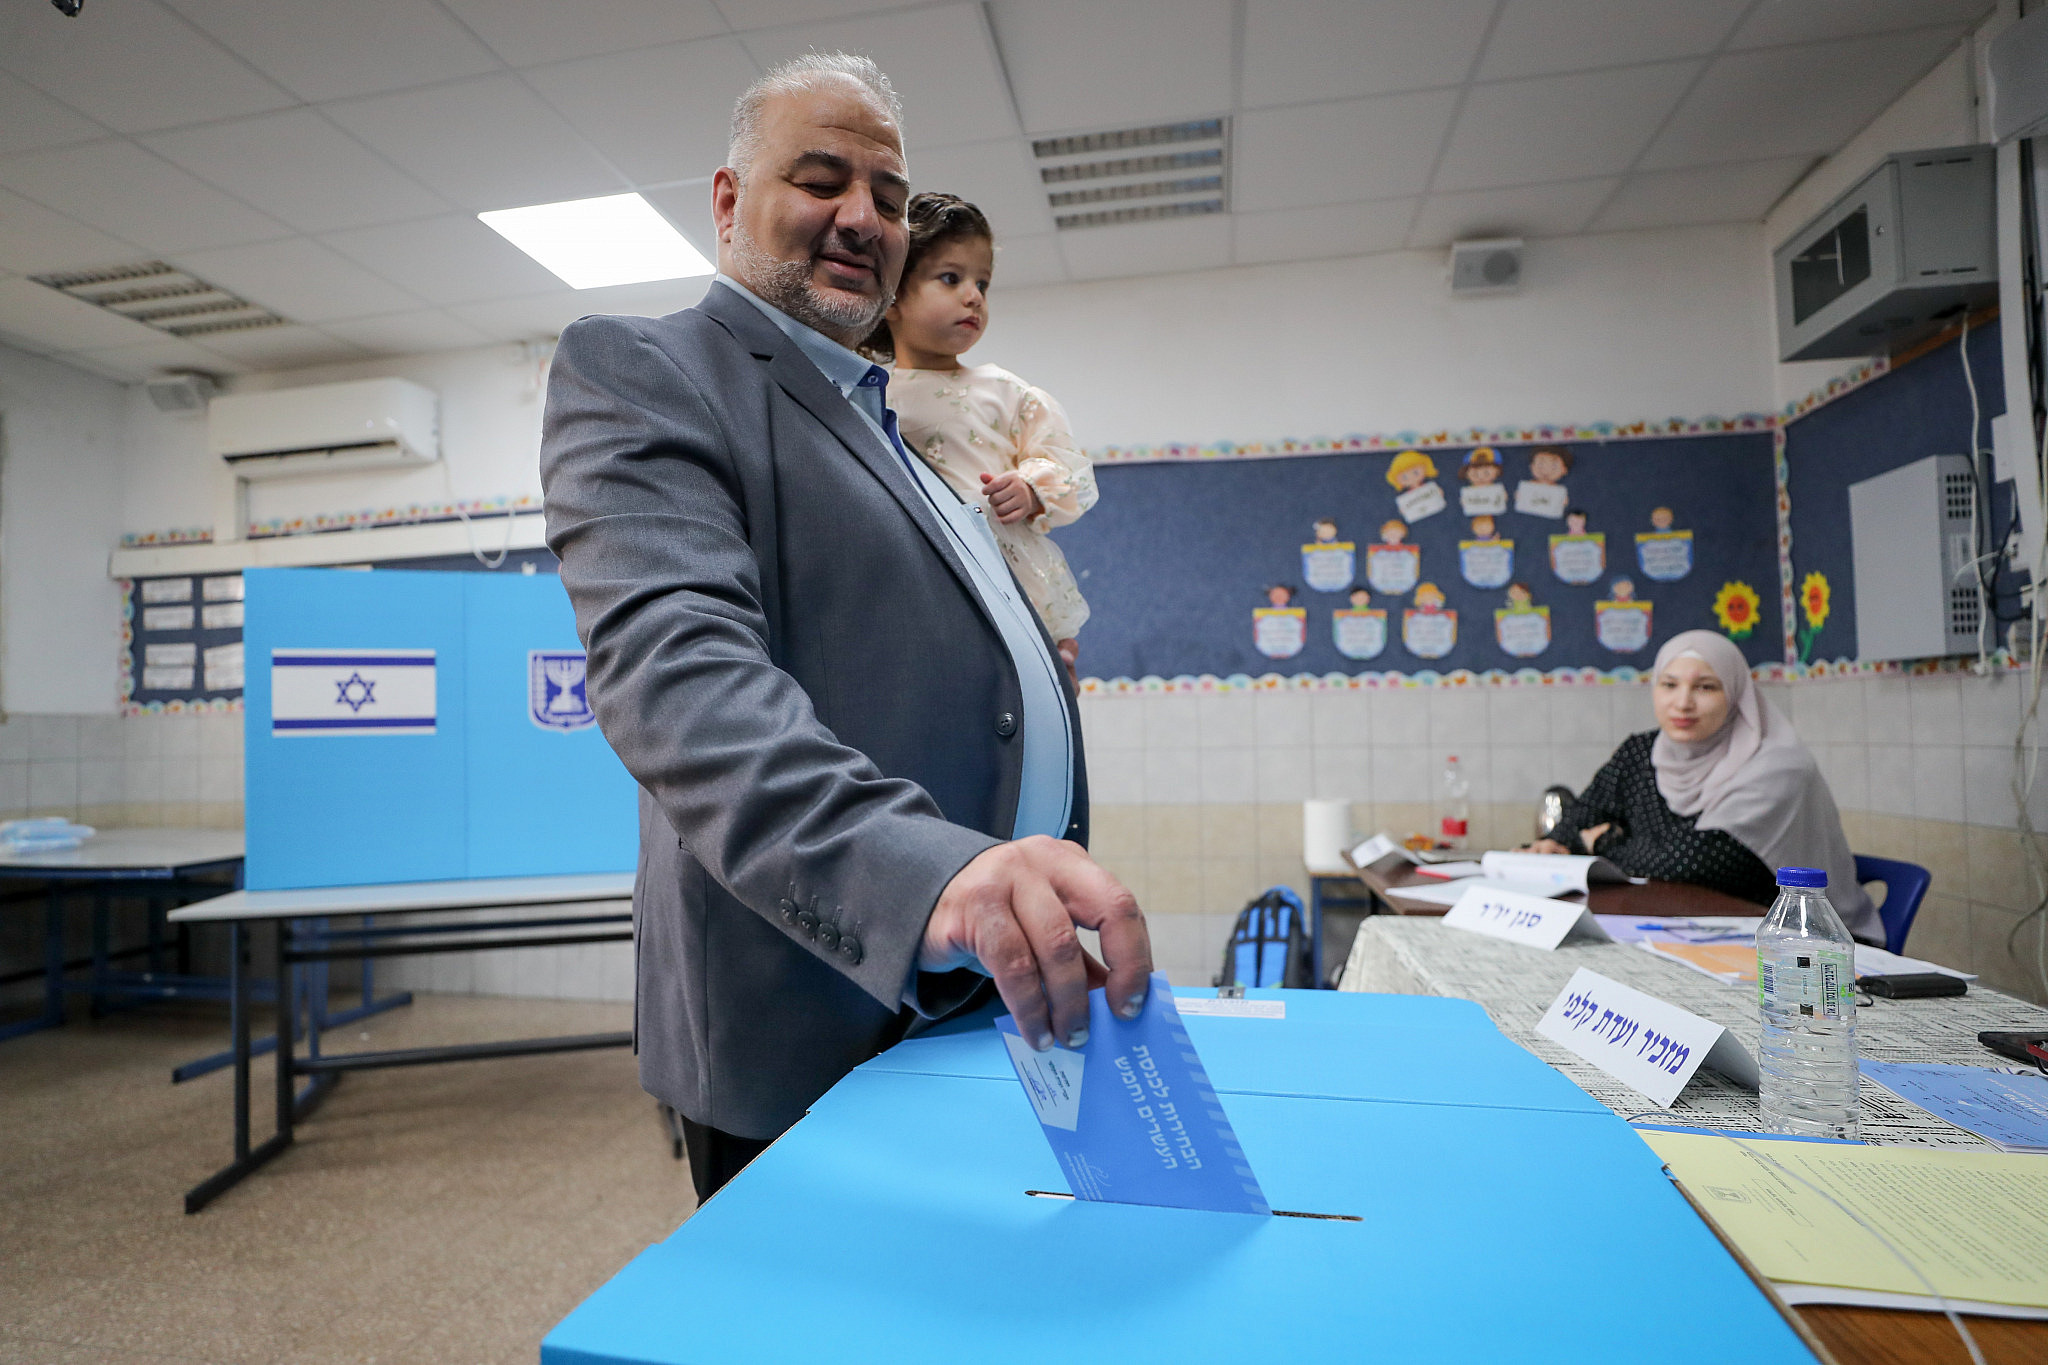 Ra'am party leader Mansour Abbas casts his vote at a voting station in Maghar during the Knesset Elections, November 1, 2022. (Jamal Awad/Flash90)